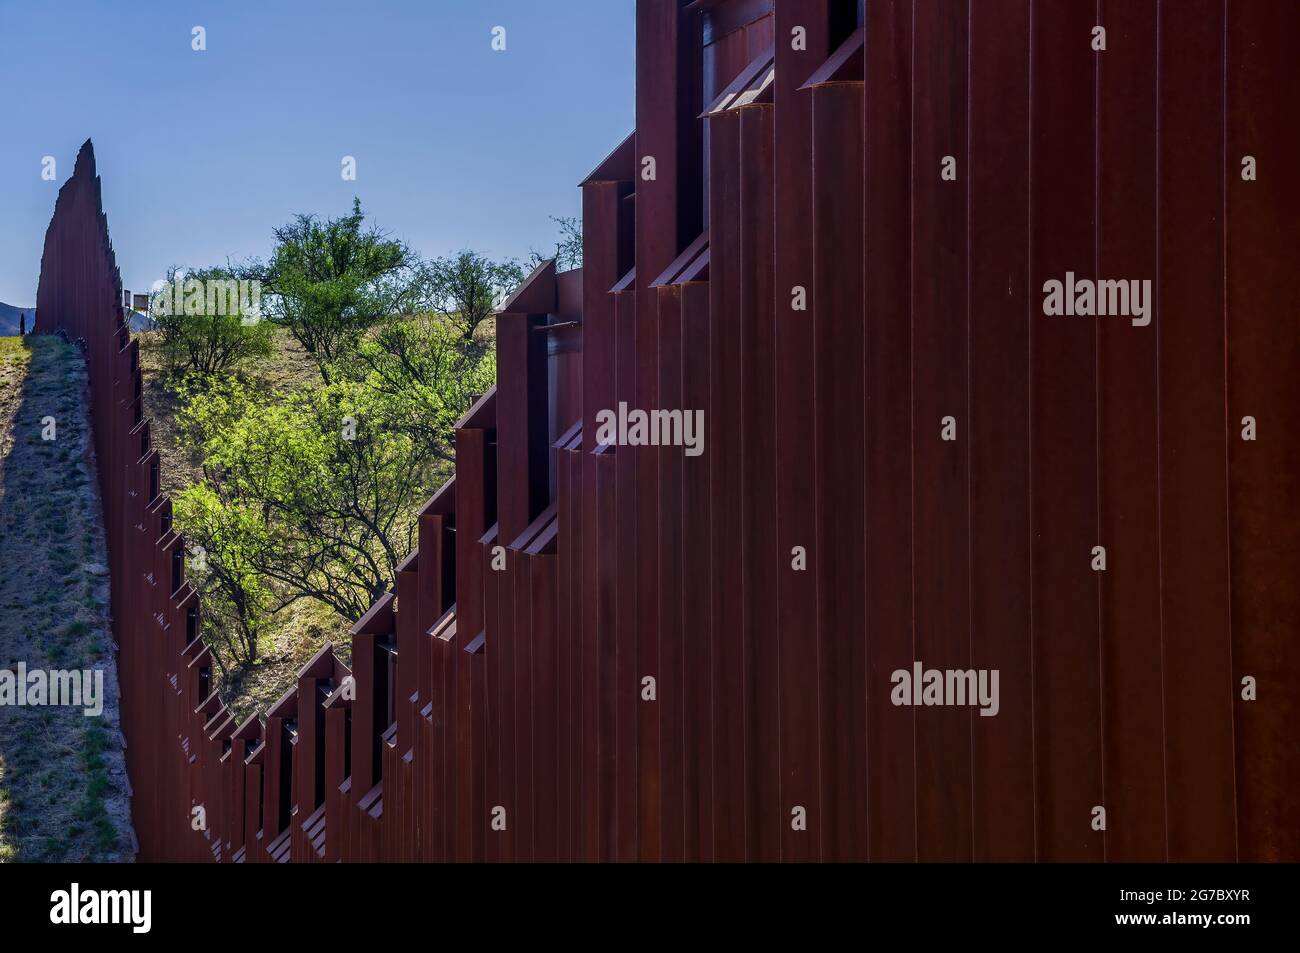 Image shows US border fence on the Mexico border, east of Nogales Arizona and Nogales Sonora Mexico, viewed from US side looking east. Note how fence Stock Photo